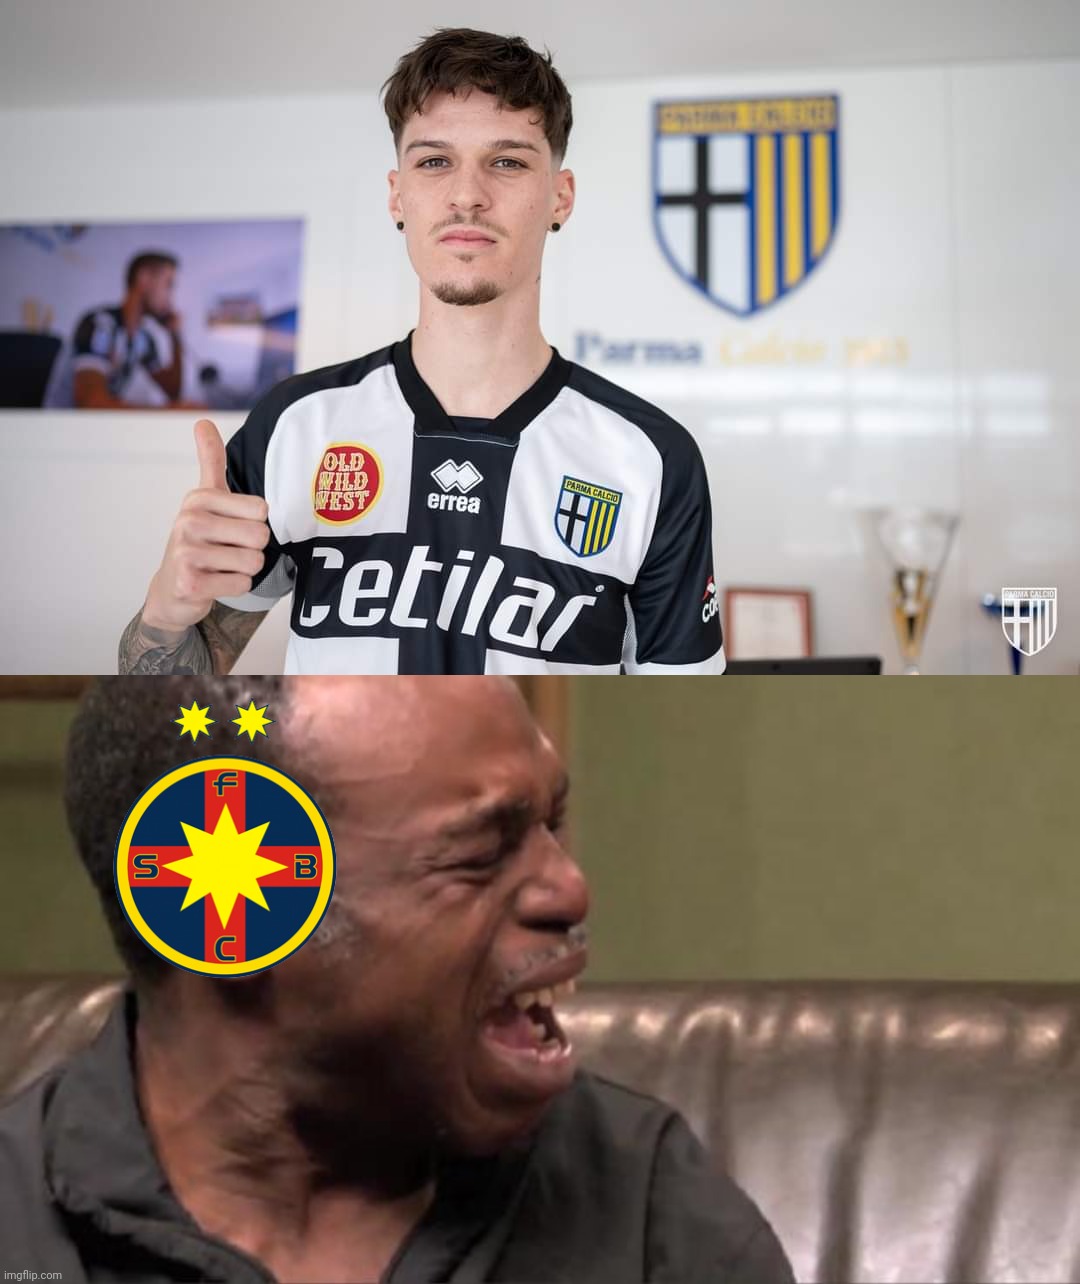 FCSB/Steaua fans right now | image tagged in best cry ever,dennis man,fcsb,parma,so sad,memes | made w/ Imgflip meme maker